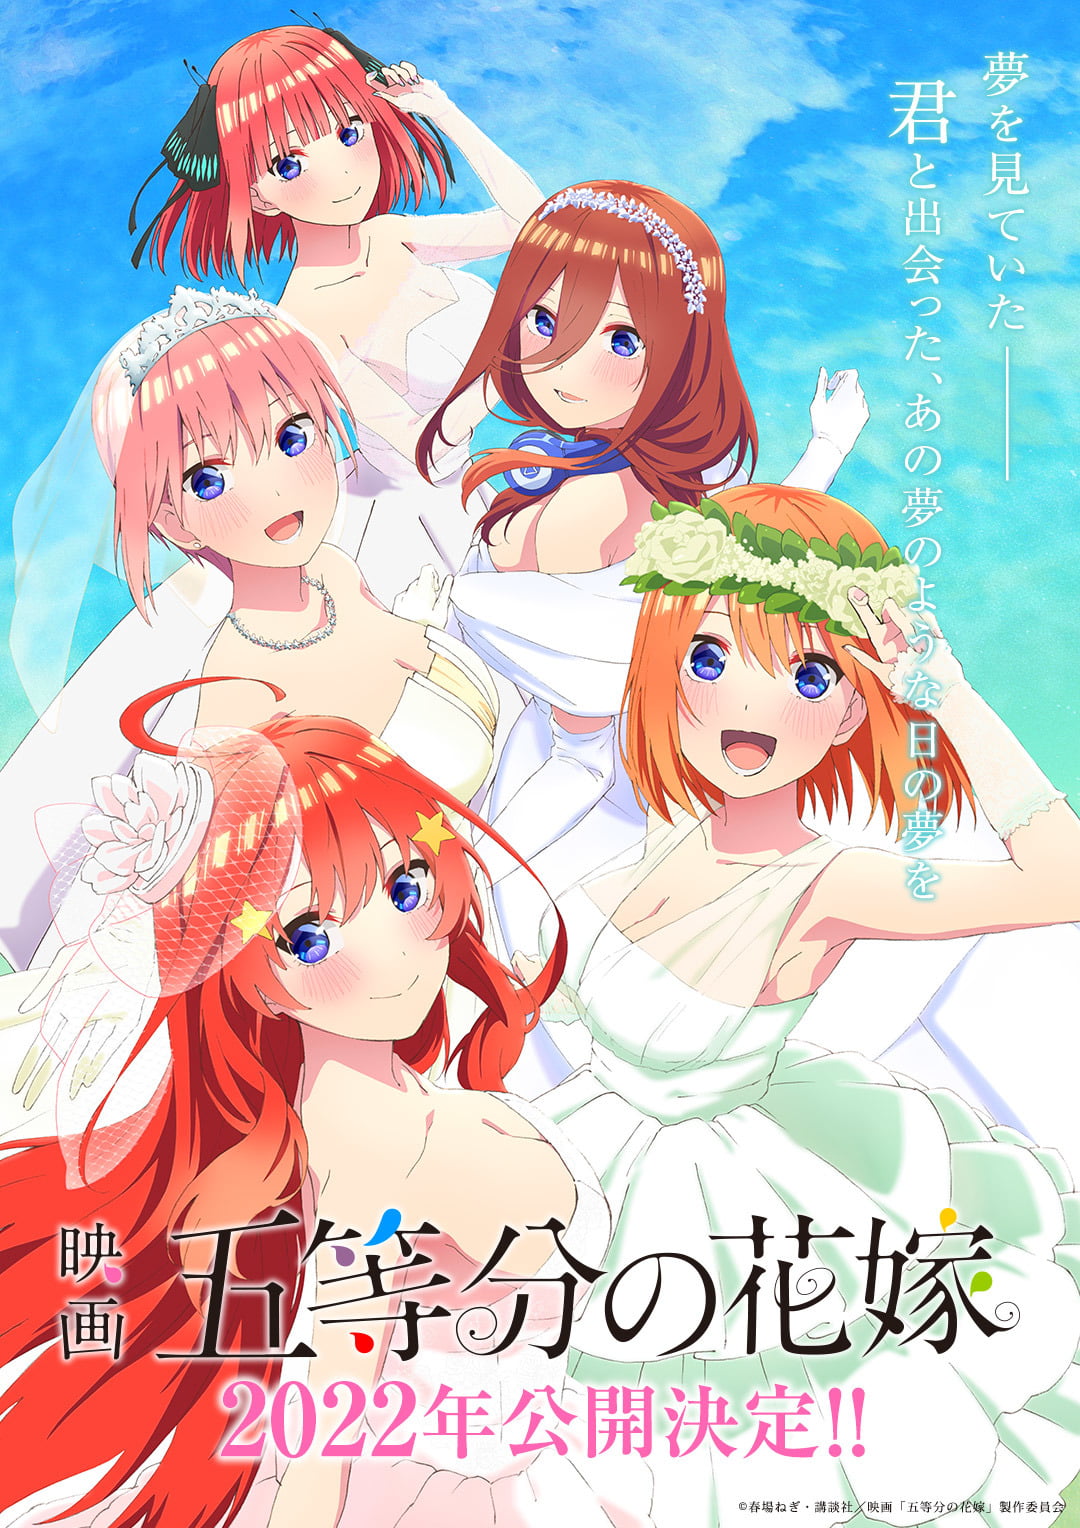  The Quintessential Quintuplets Movie 2022, Official Trailer